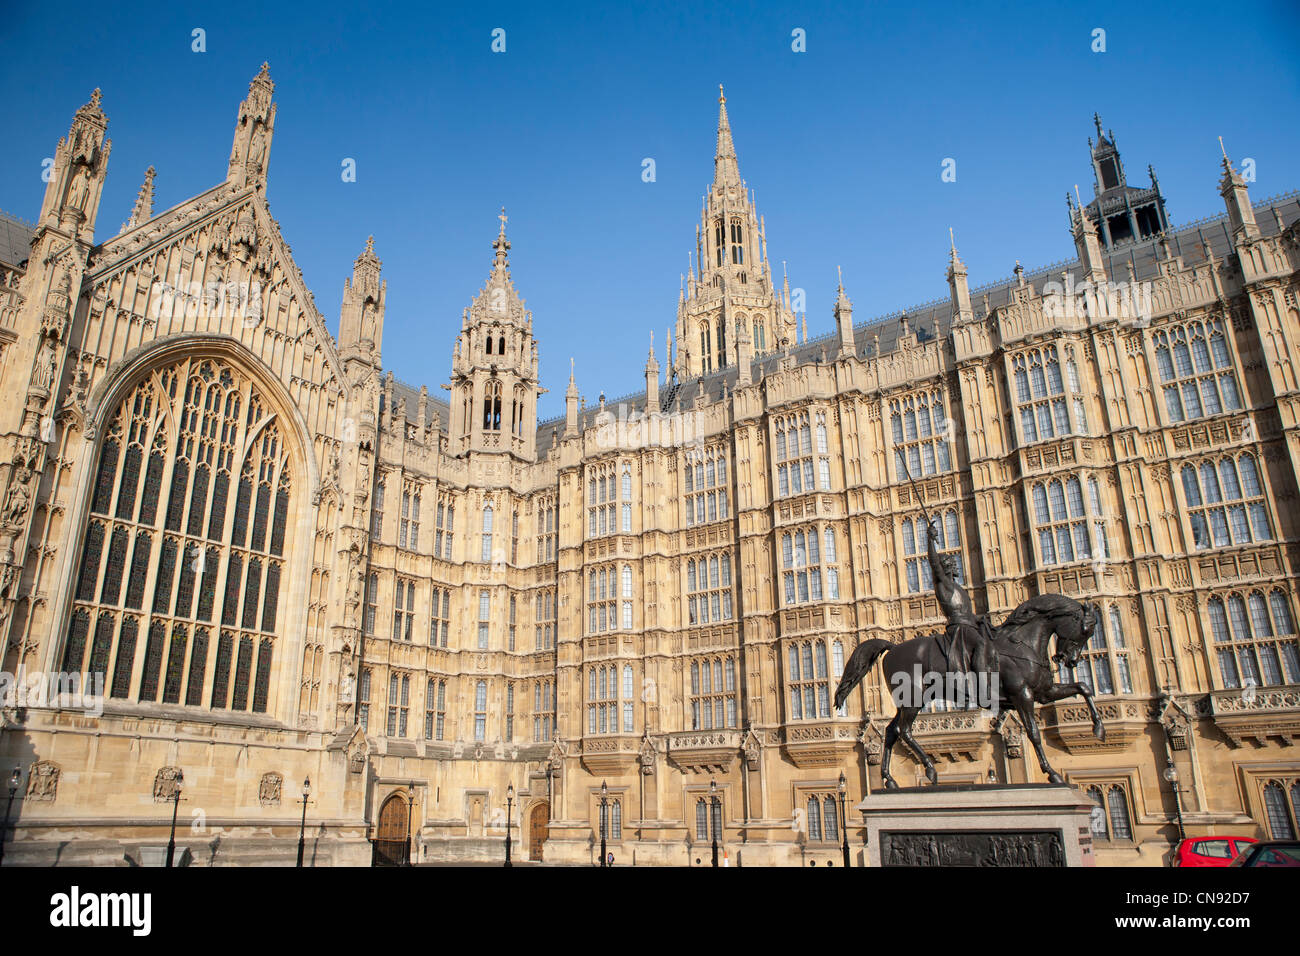 Equestrian statue of King Richard I at the Palace of Westminster, London Stock Photo